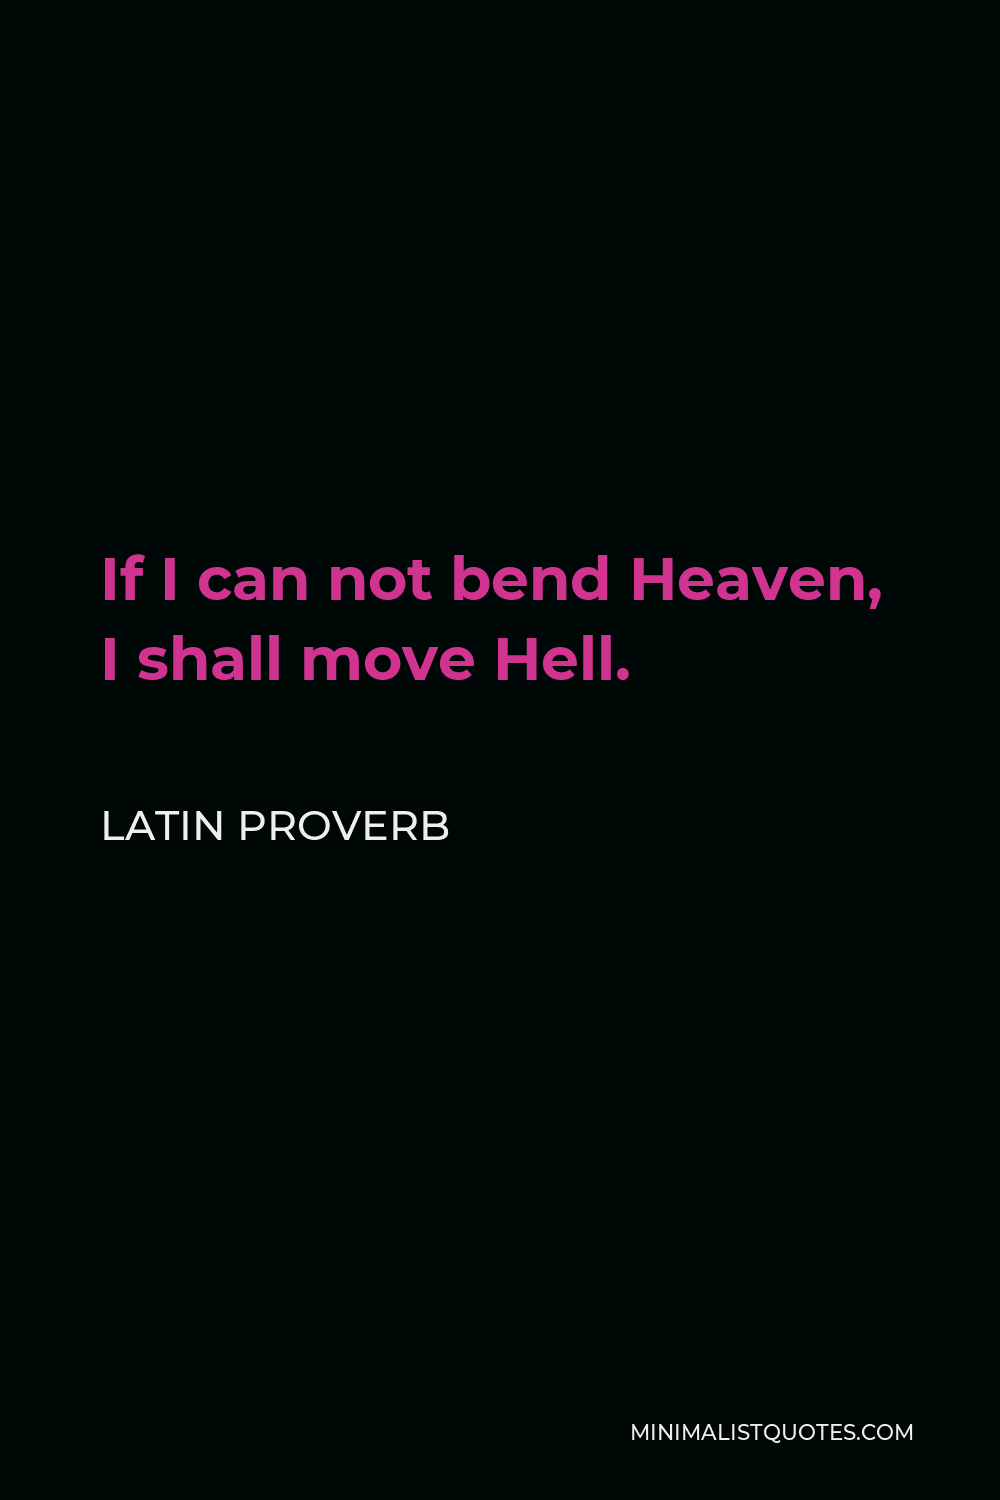 Latin Proverb Quote - If I can not bend Heaven, I shall move Hell.